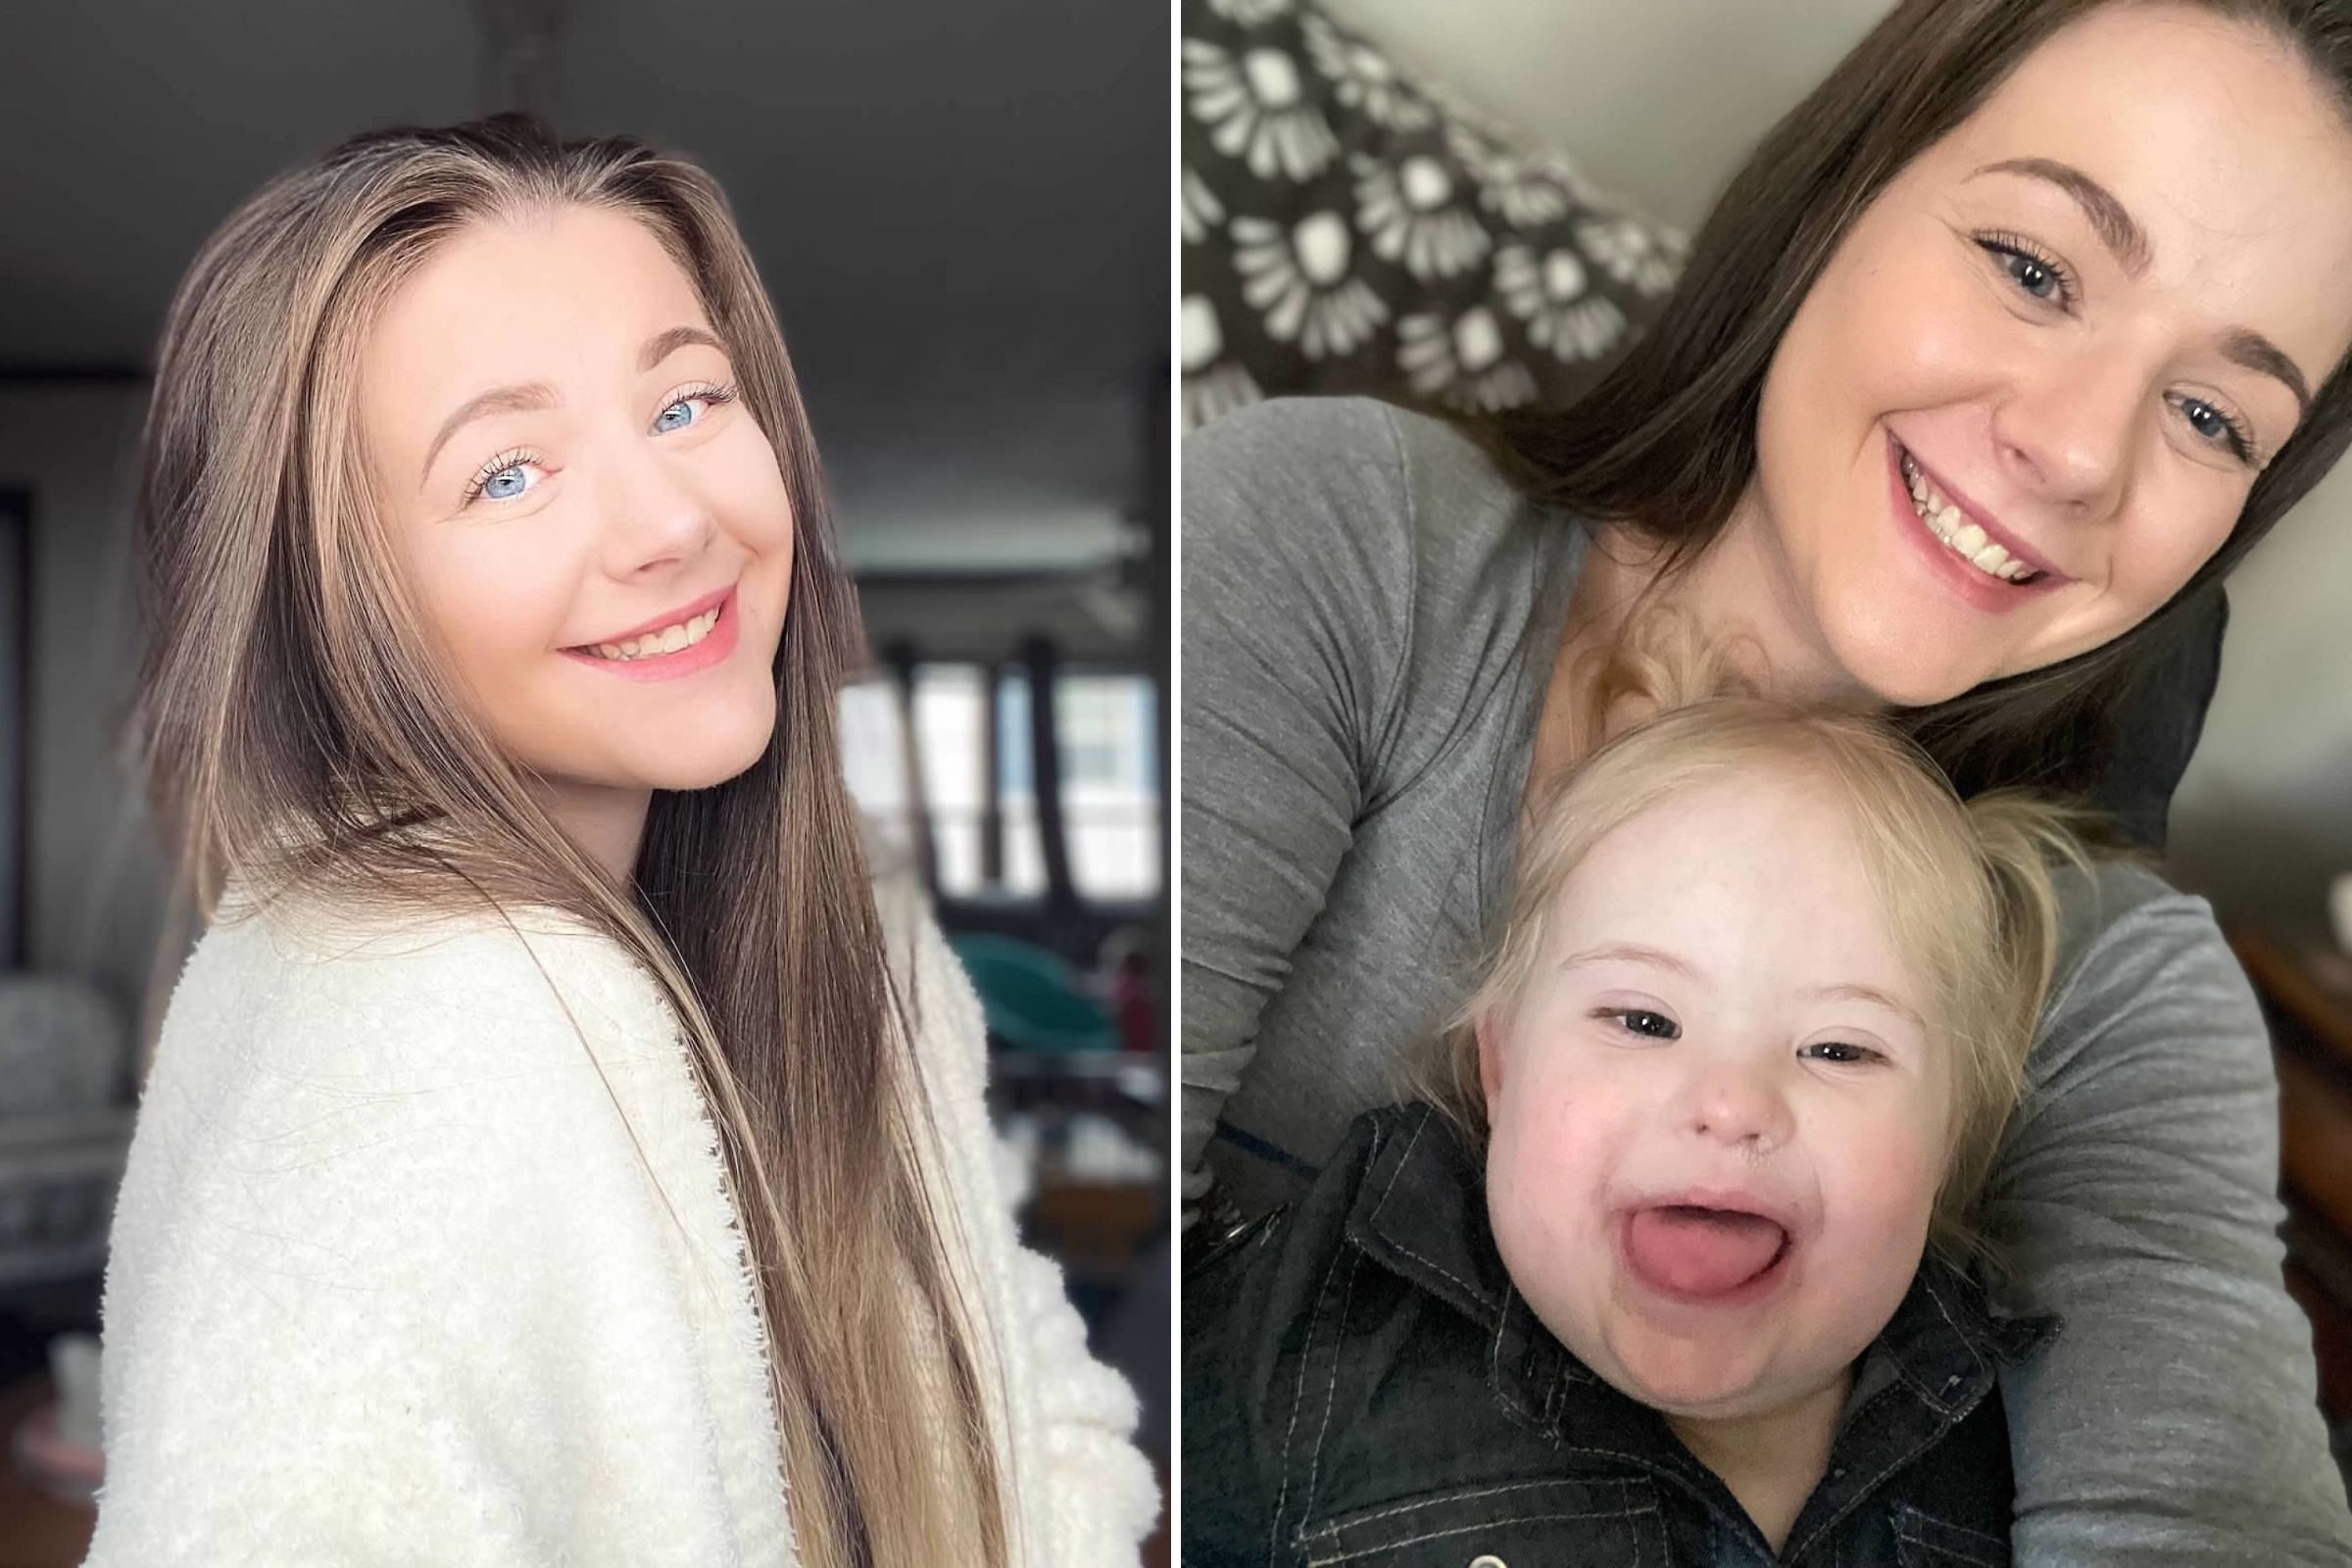 I found out I had Down syndrome aged 23 – people don't believe I have it